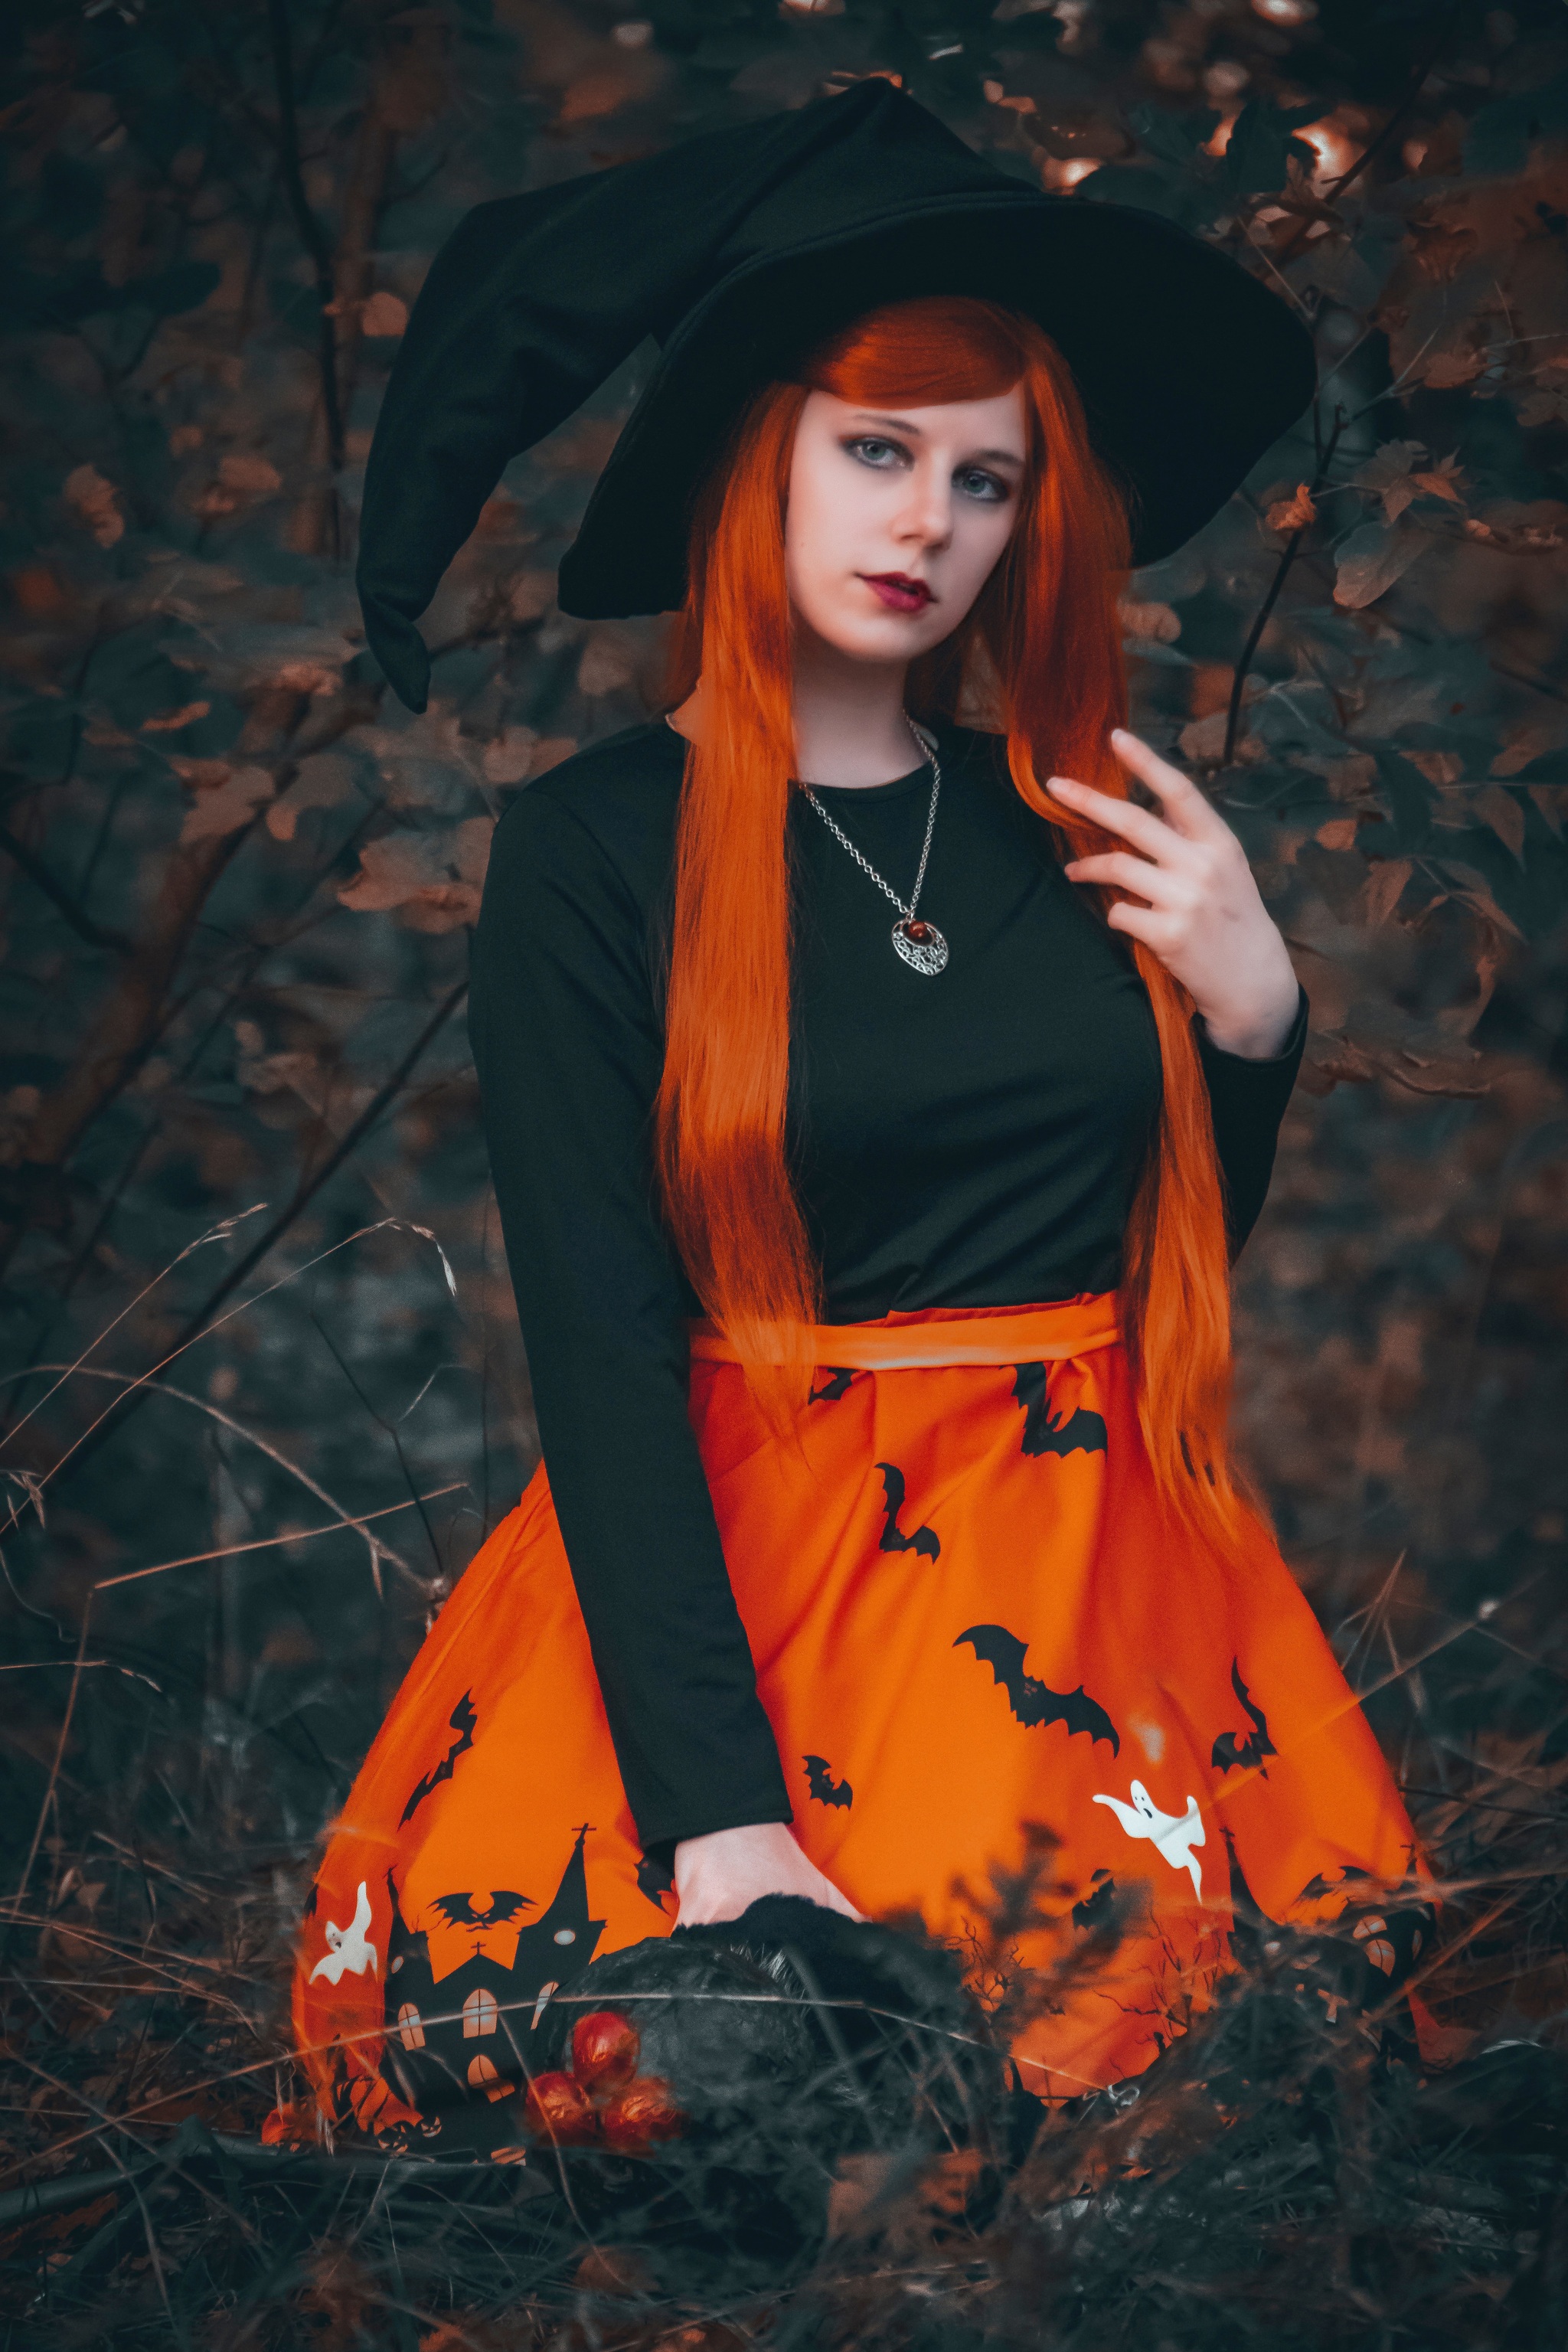 Photoshop for cosplayer - My, Cosplay, Costume, League of legends, the little Mermaid, Photoshop, Beginner artist, Halloween, Witches, The photo, Longpost